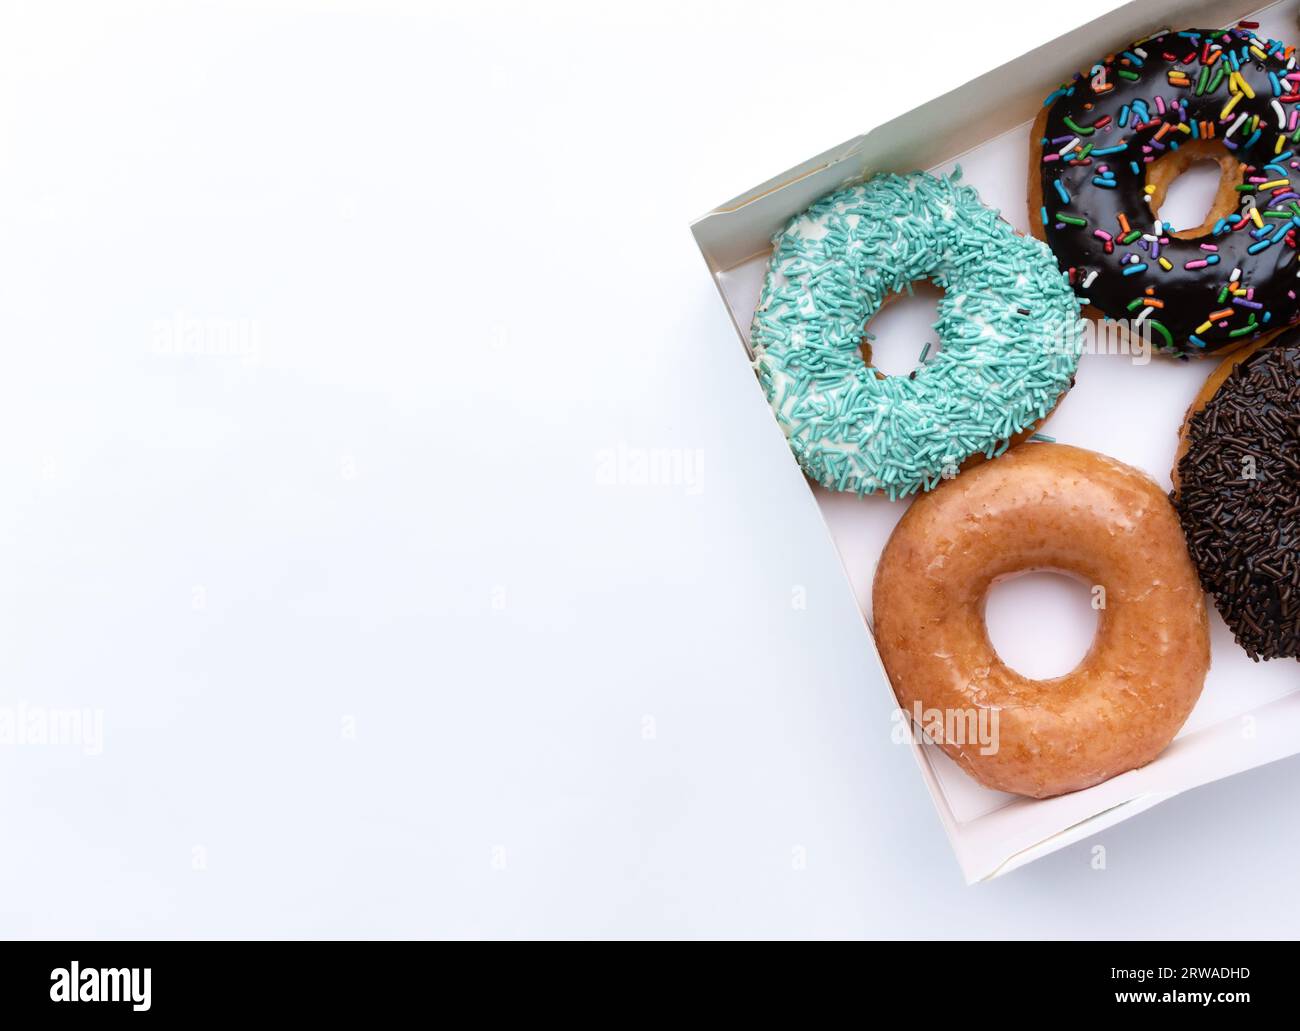 Donuts in its package. After some edits. Stock Photo